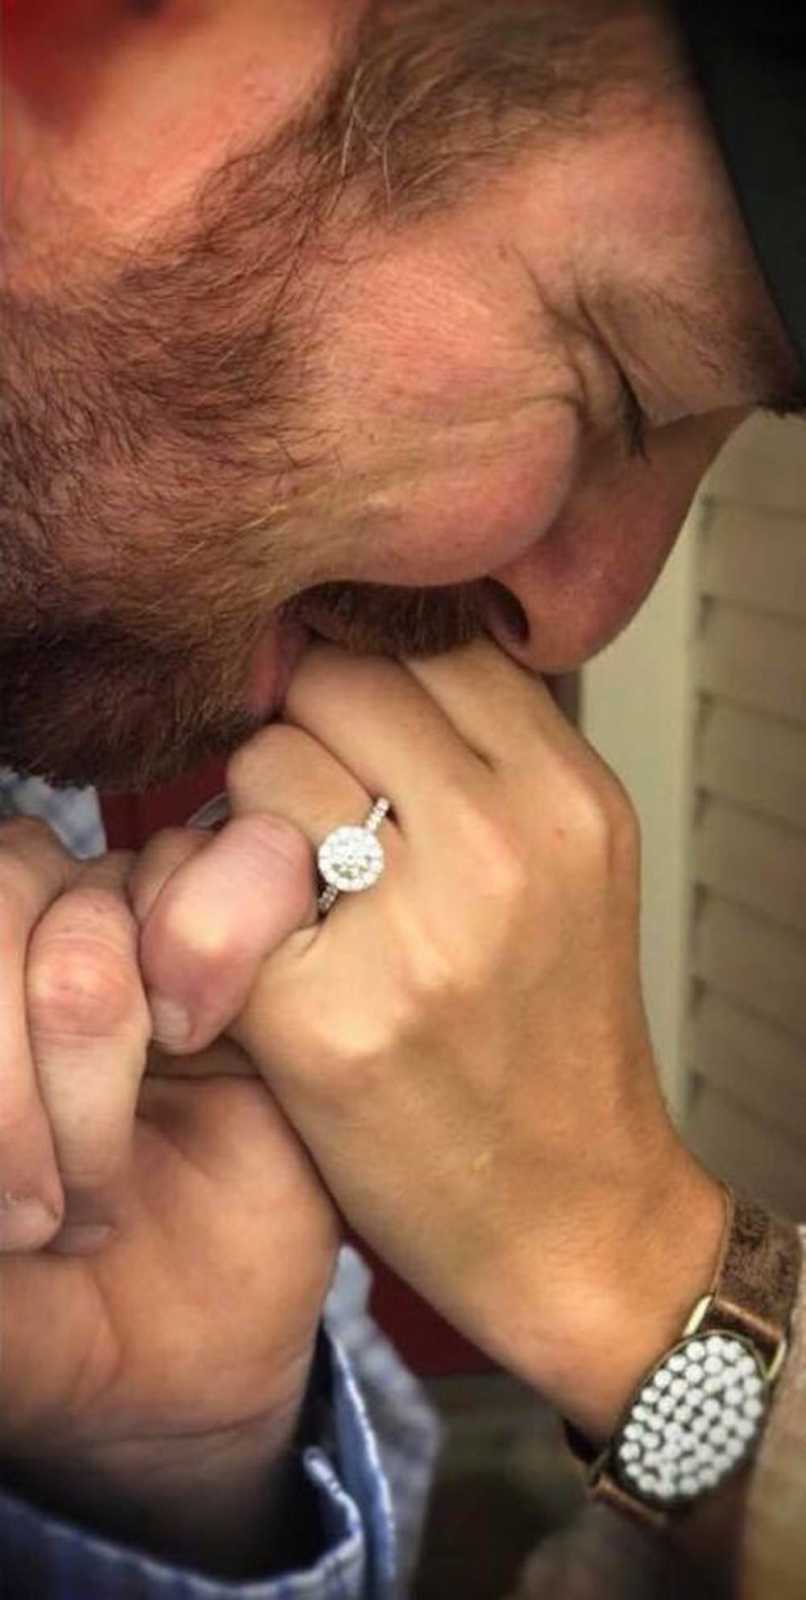 Man kisses fiancee's hand with ring on it